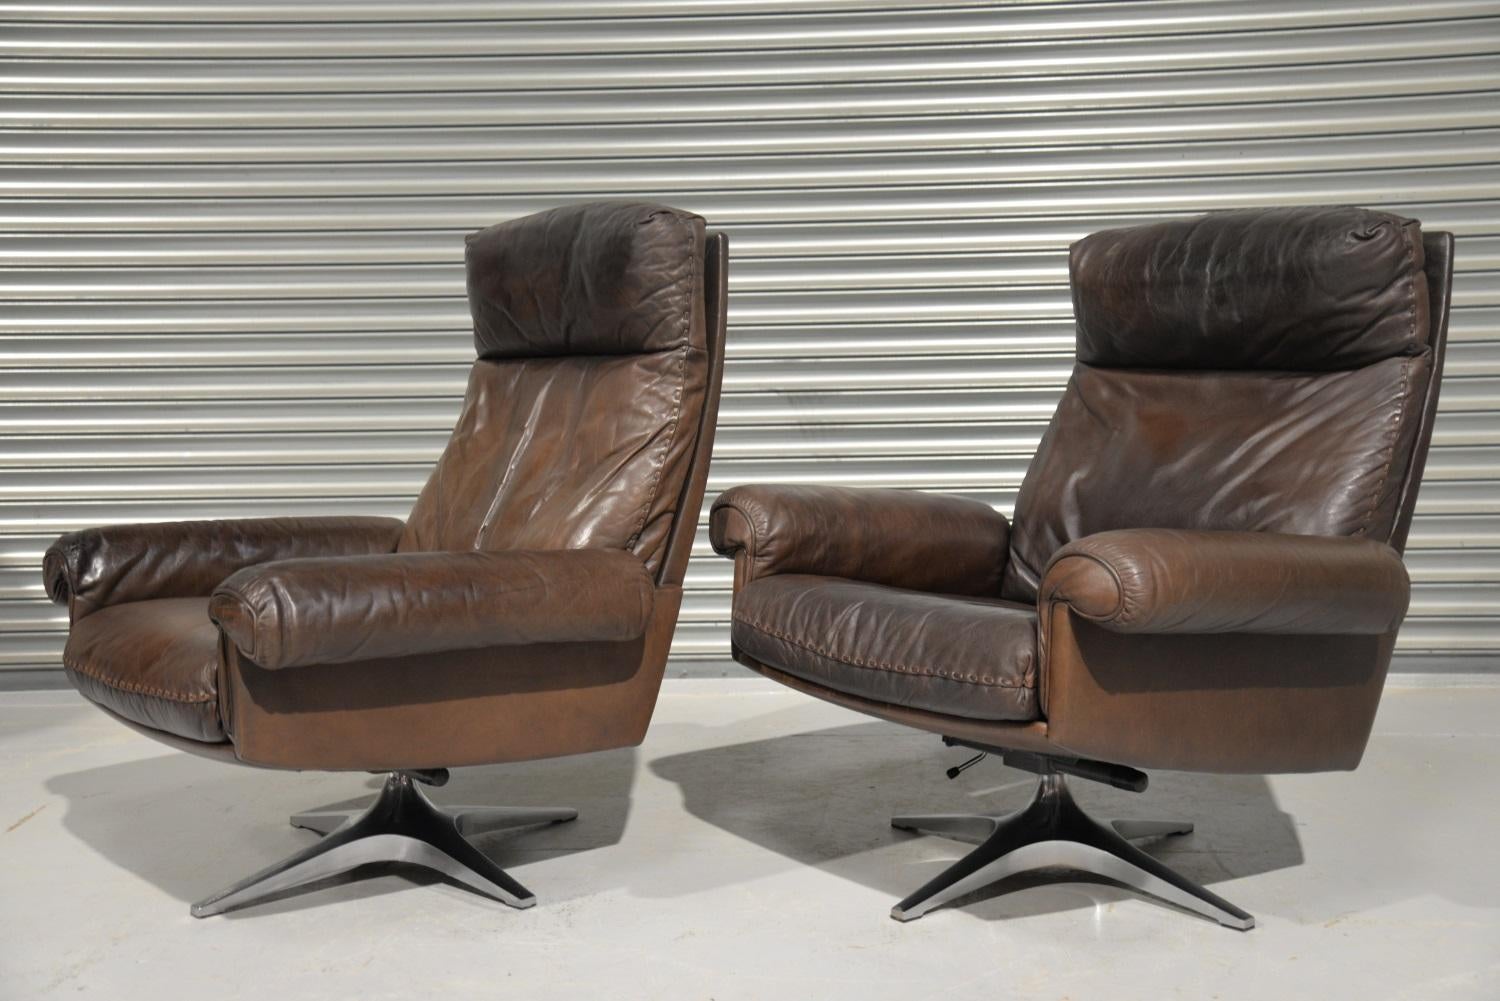 Discounted airfreight for our US and International customers (from 2 weeks door to door)

We are delighted to bring to you two vintage De Sede DS 31 highback swivel armchairs. Hand built in the early 1970s by De Sede craftsman in Switzerland these